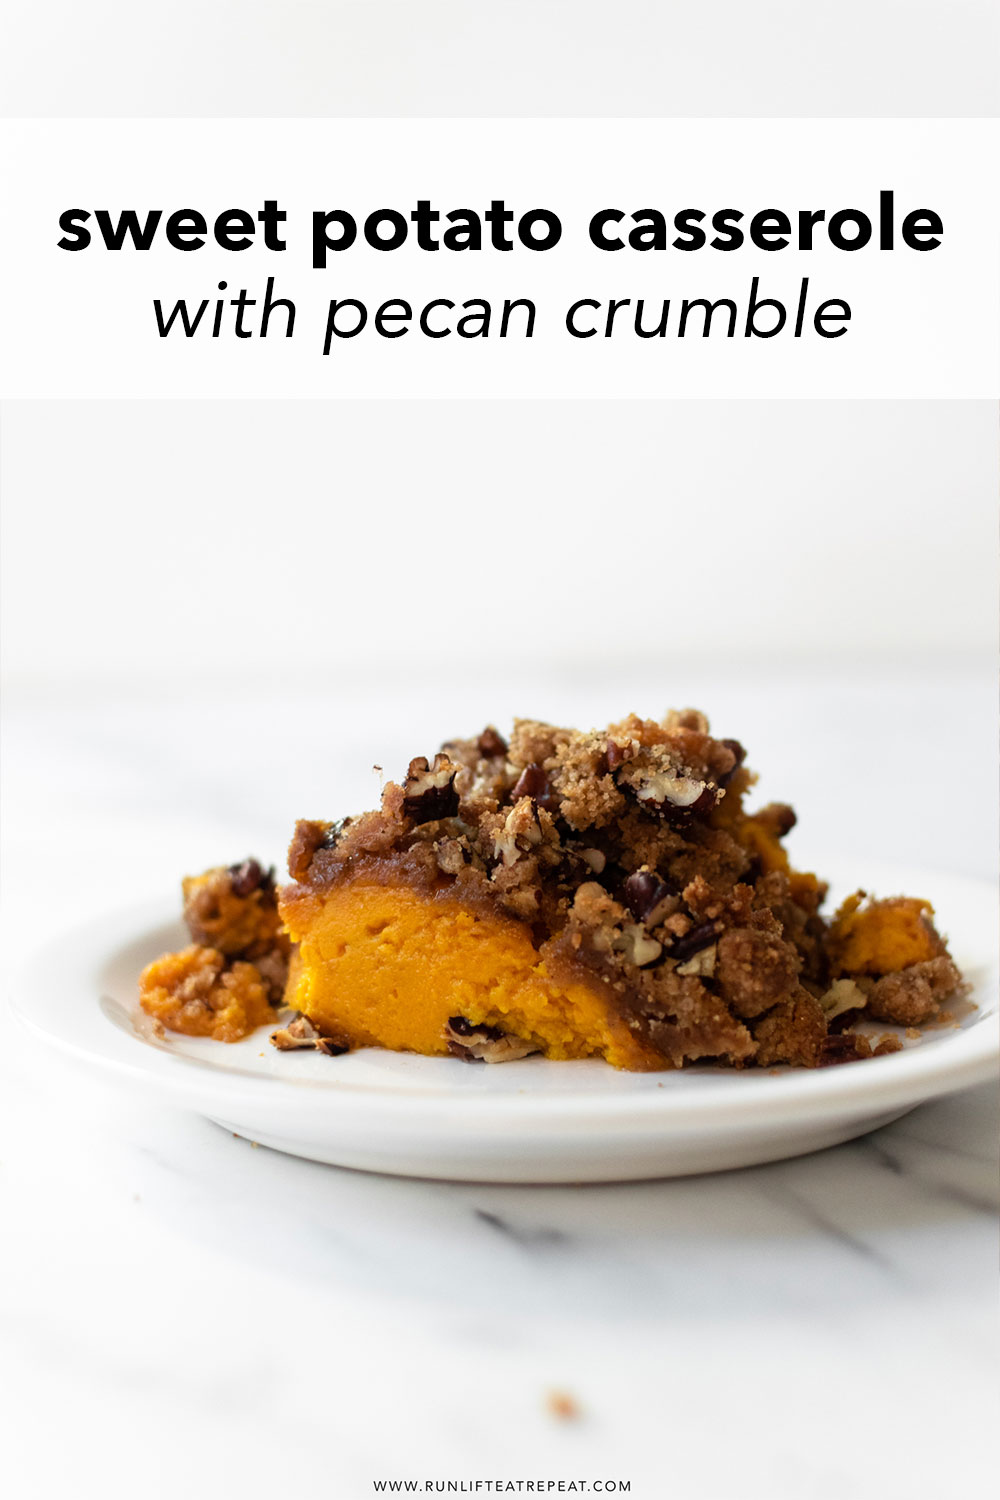 This homemade sweet potato casserole will be a star on your Thanksgiving table— one bit and you'll know why! It's full of flavor, comes together quick and topped with a pecan crumble topping for added crunch.